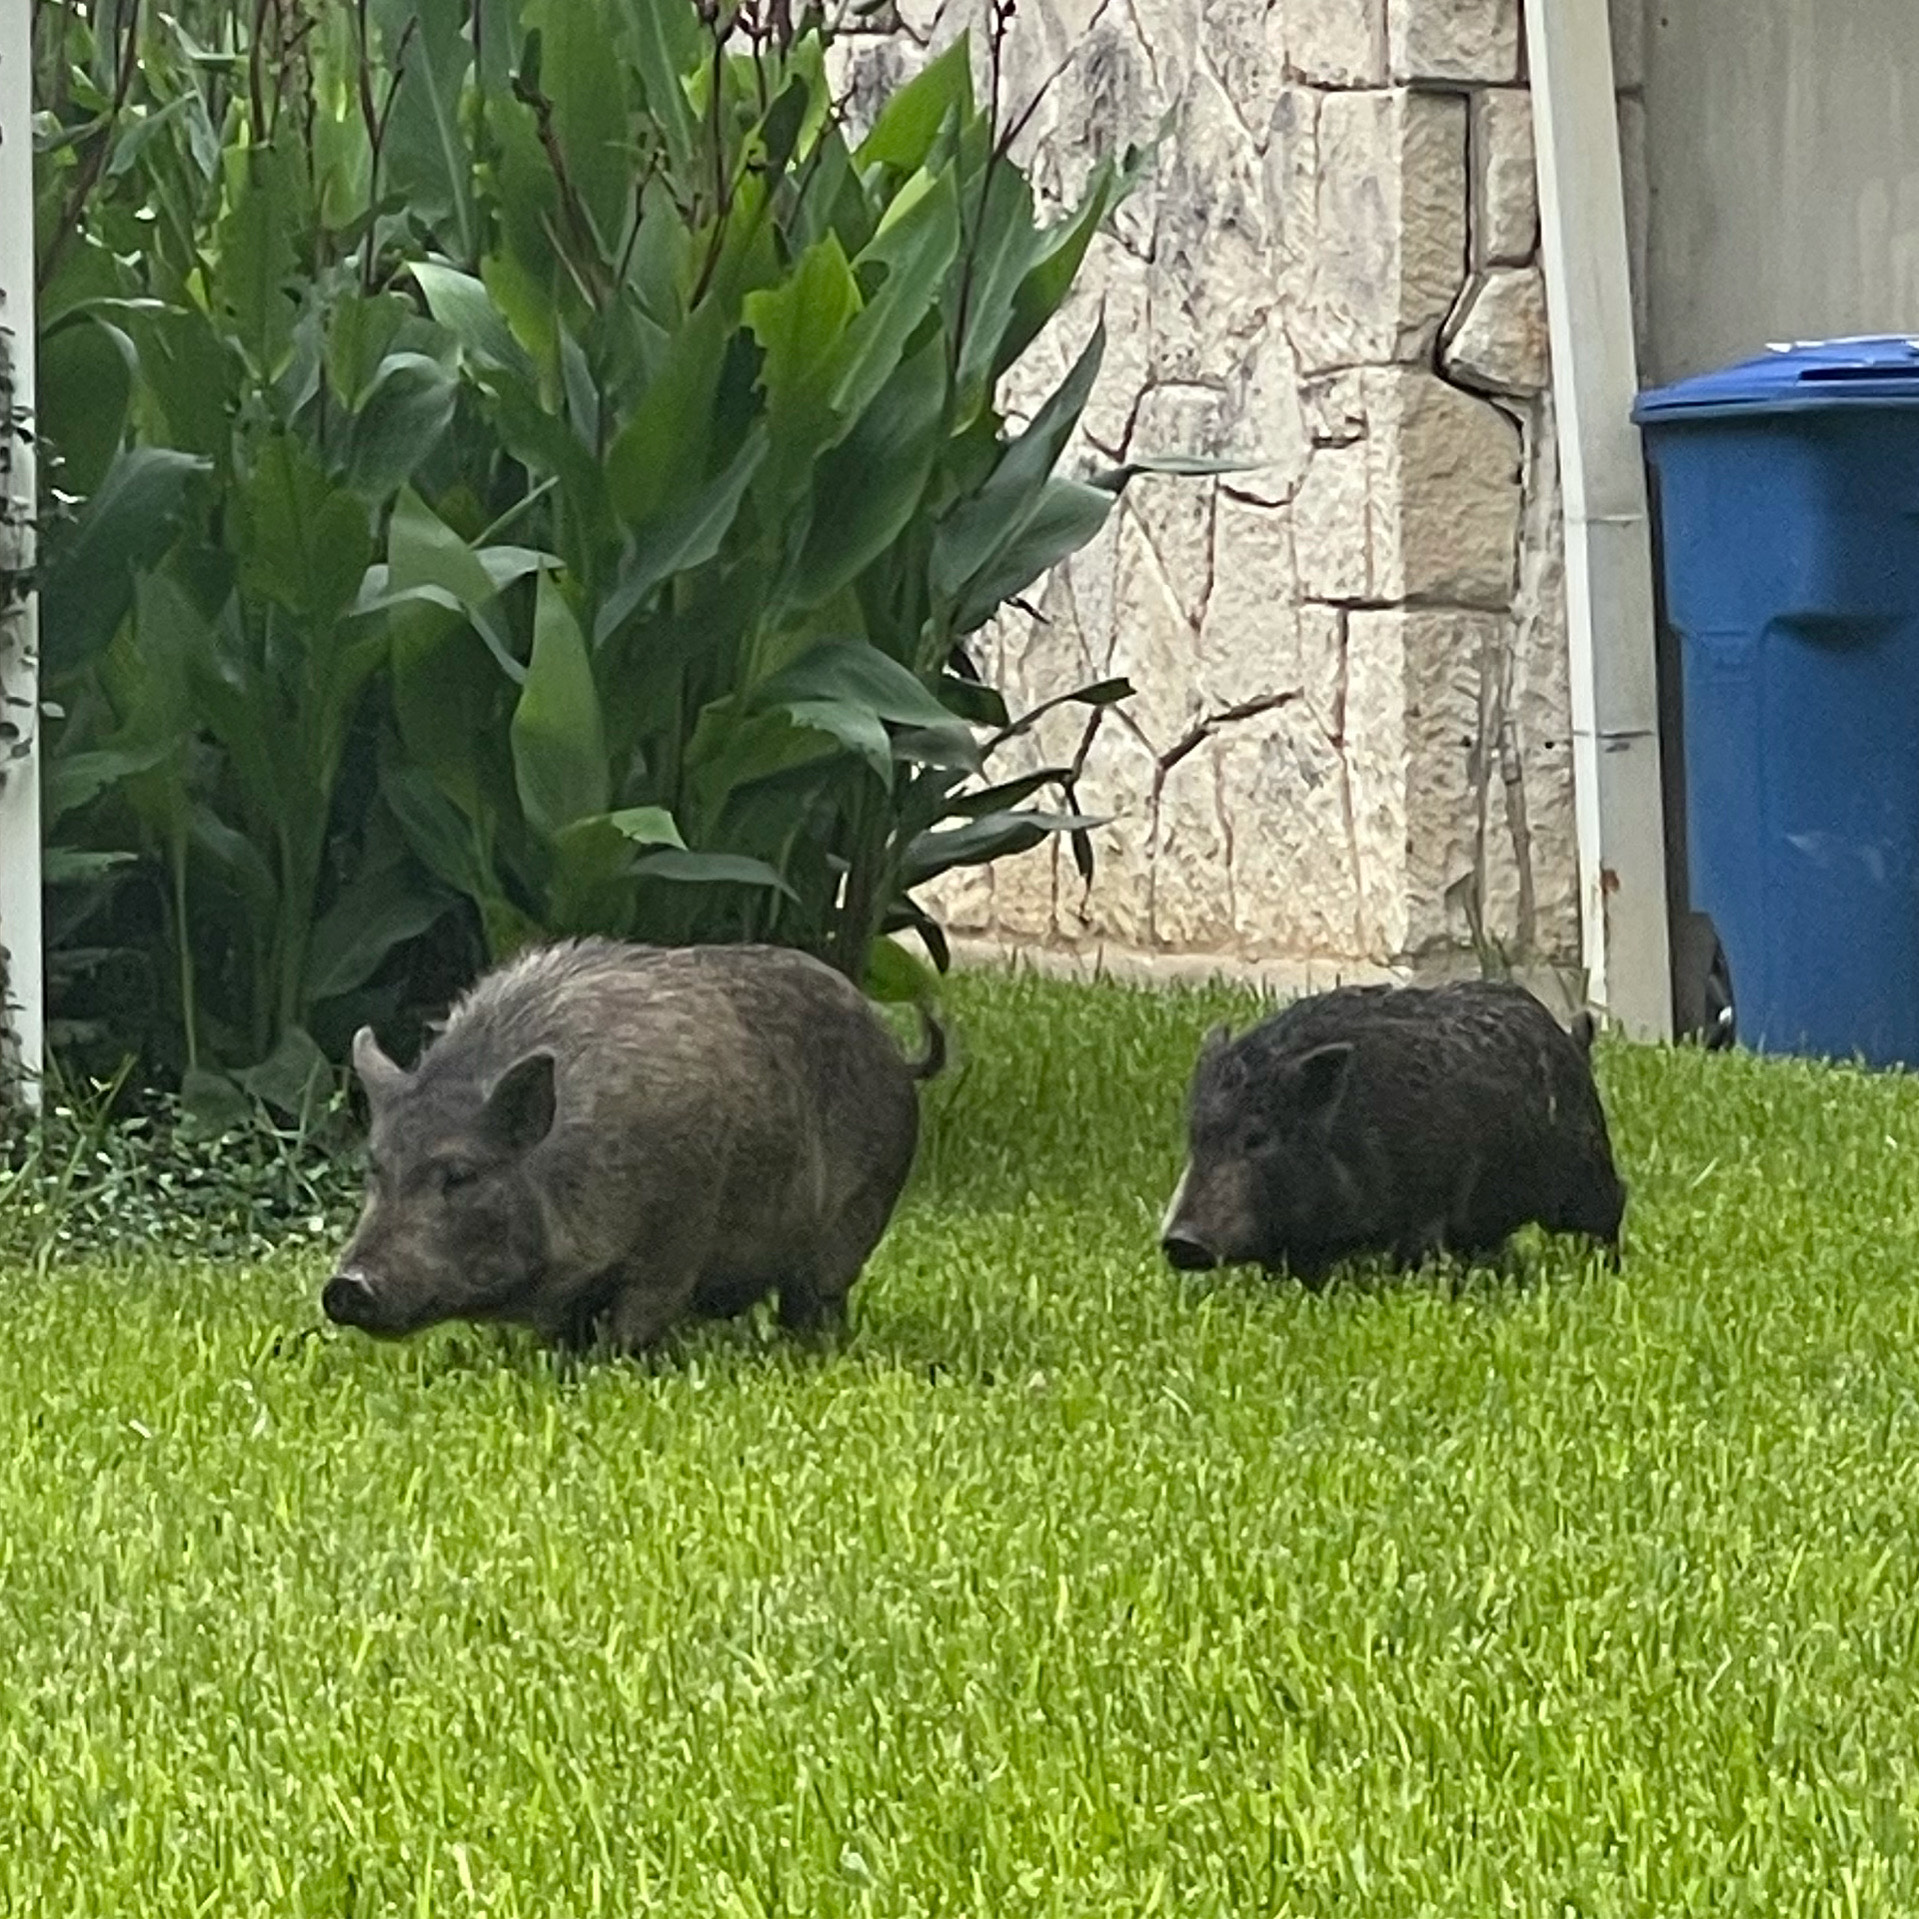 Two pigs found roaming in the vicinity of Olmos Park